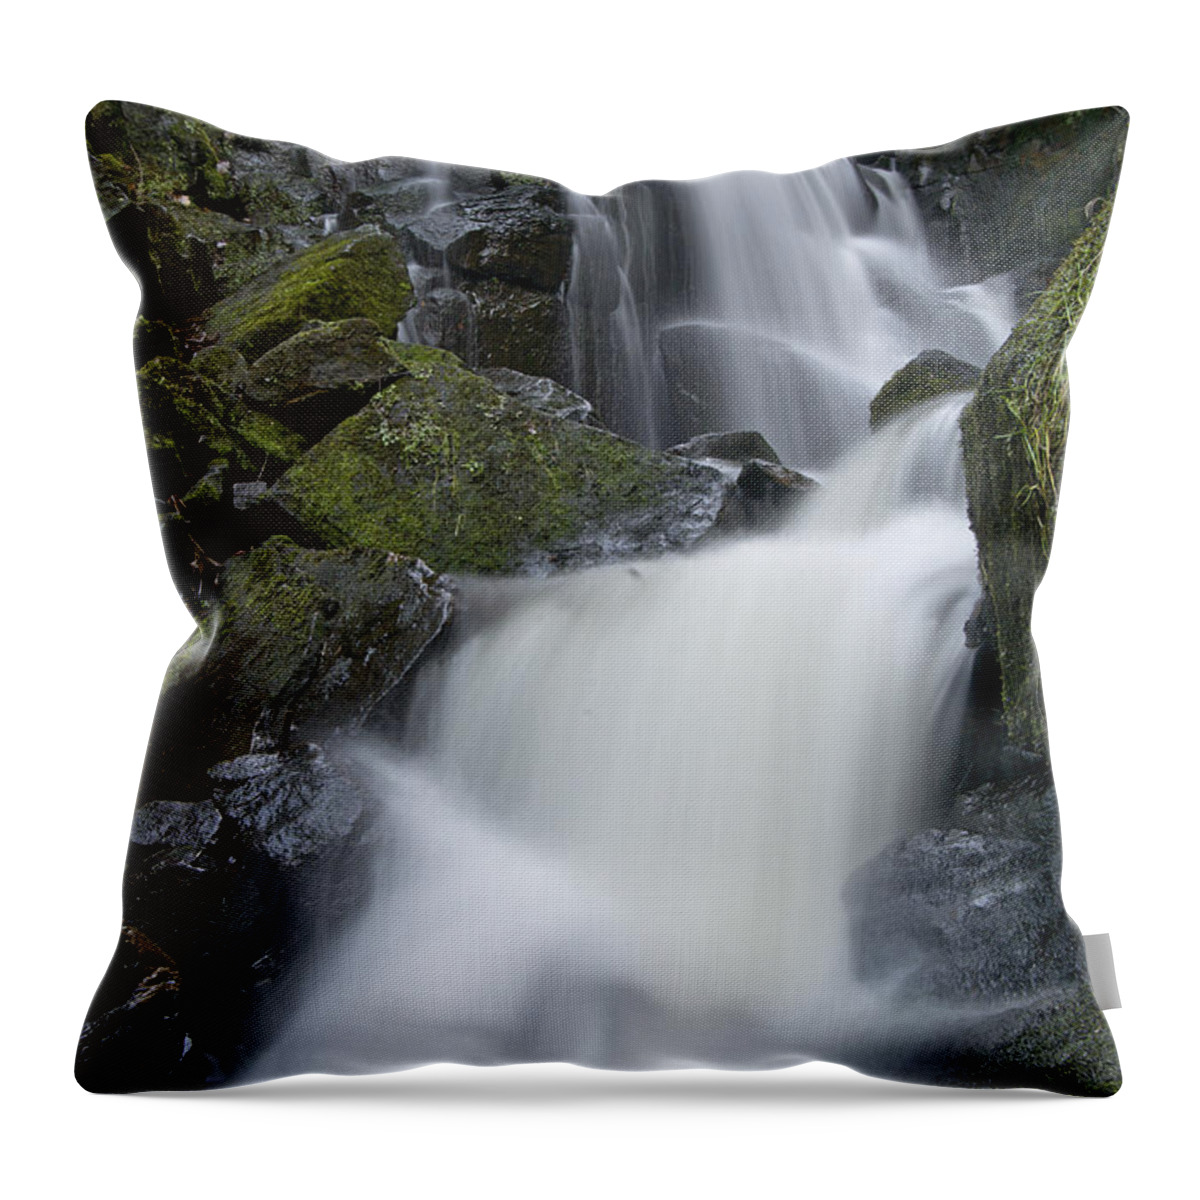 Water Throw Pillow featuring the photograph Lwv10069 by Lee Winter